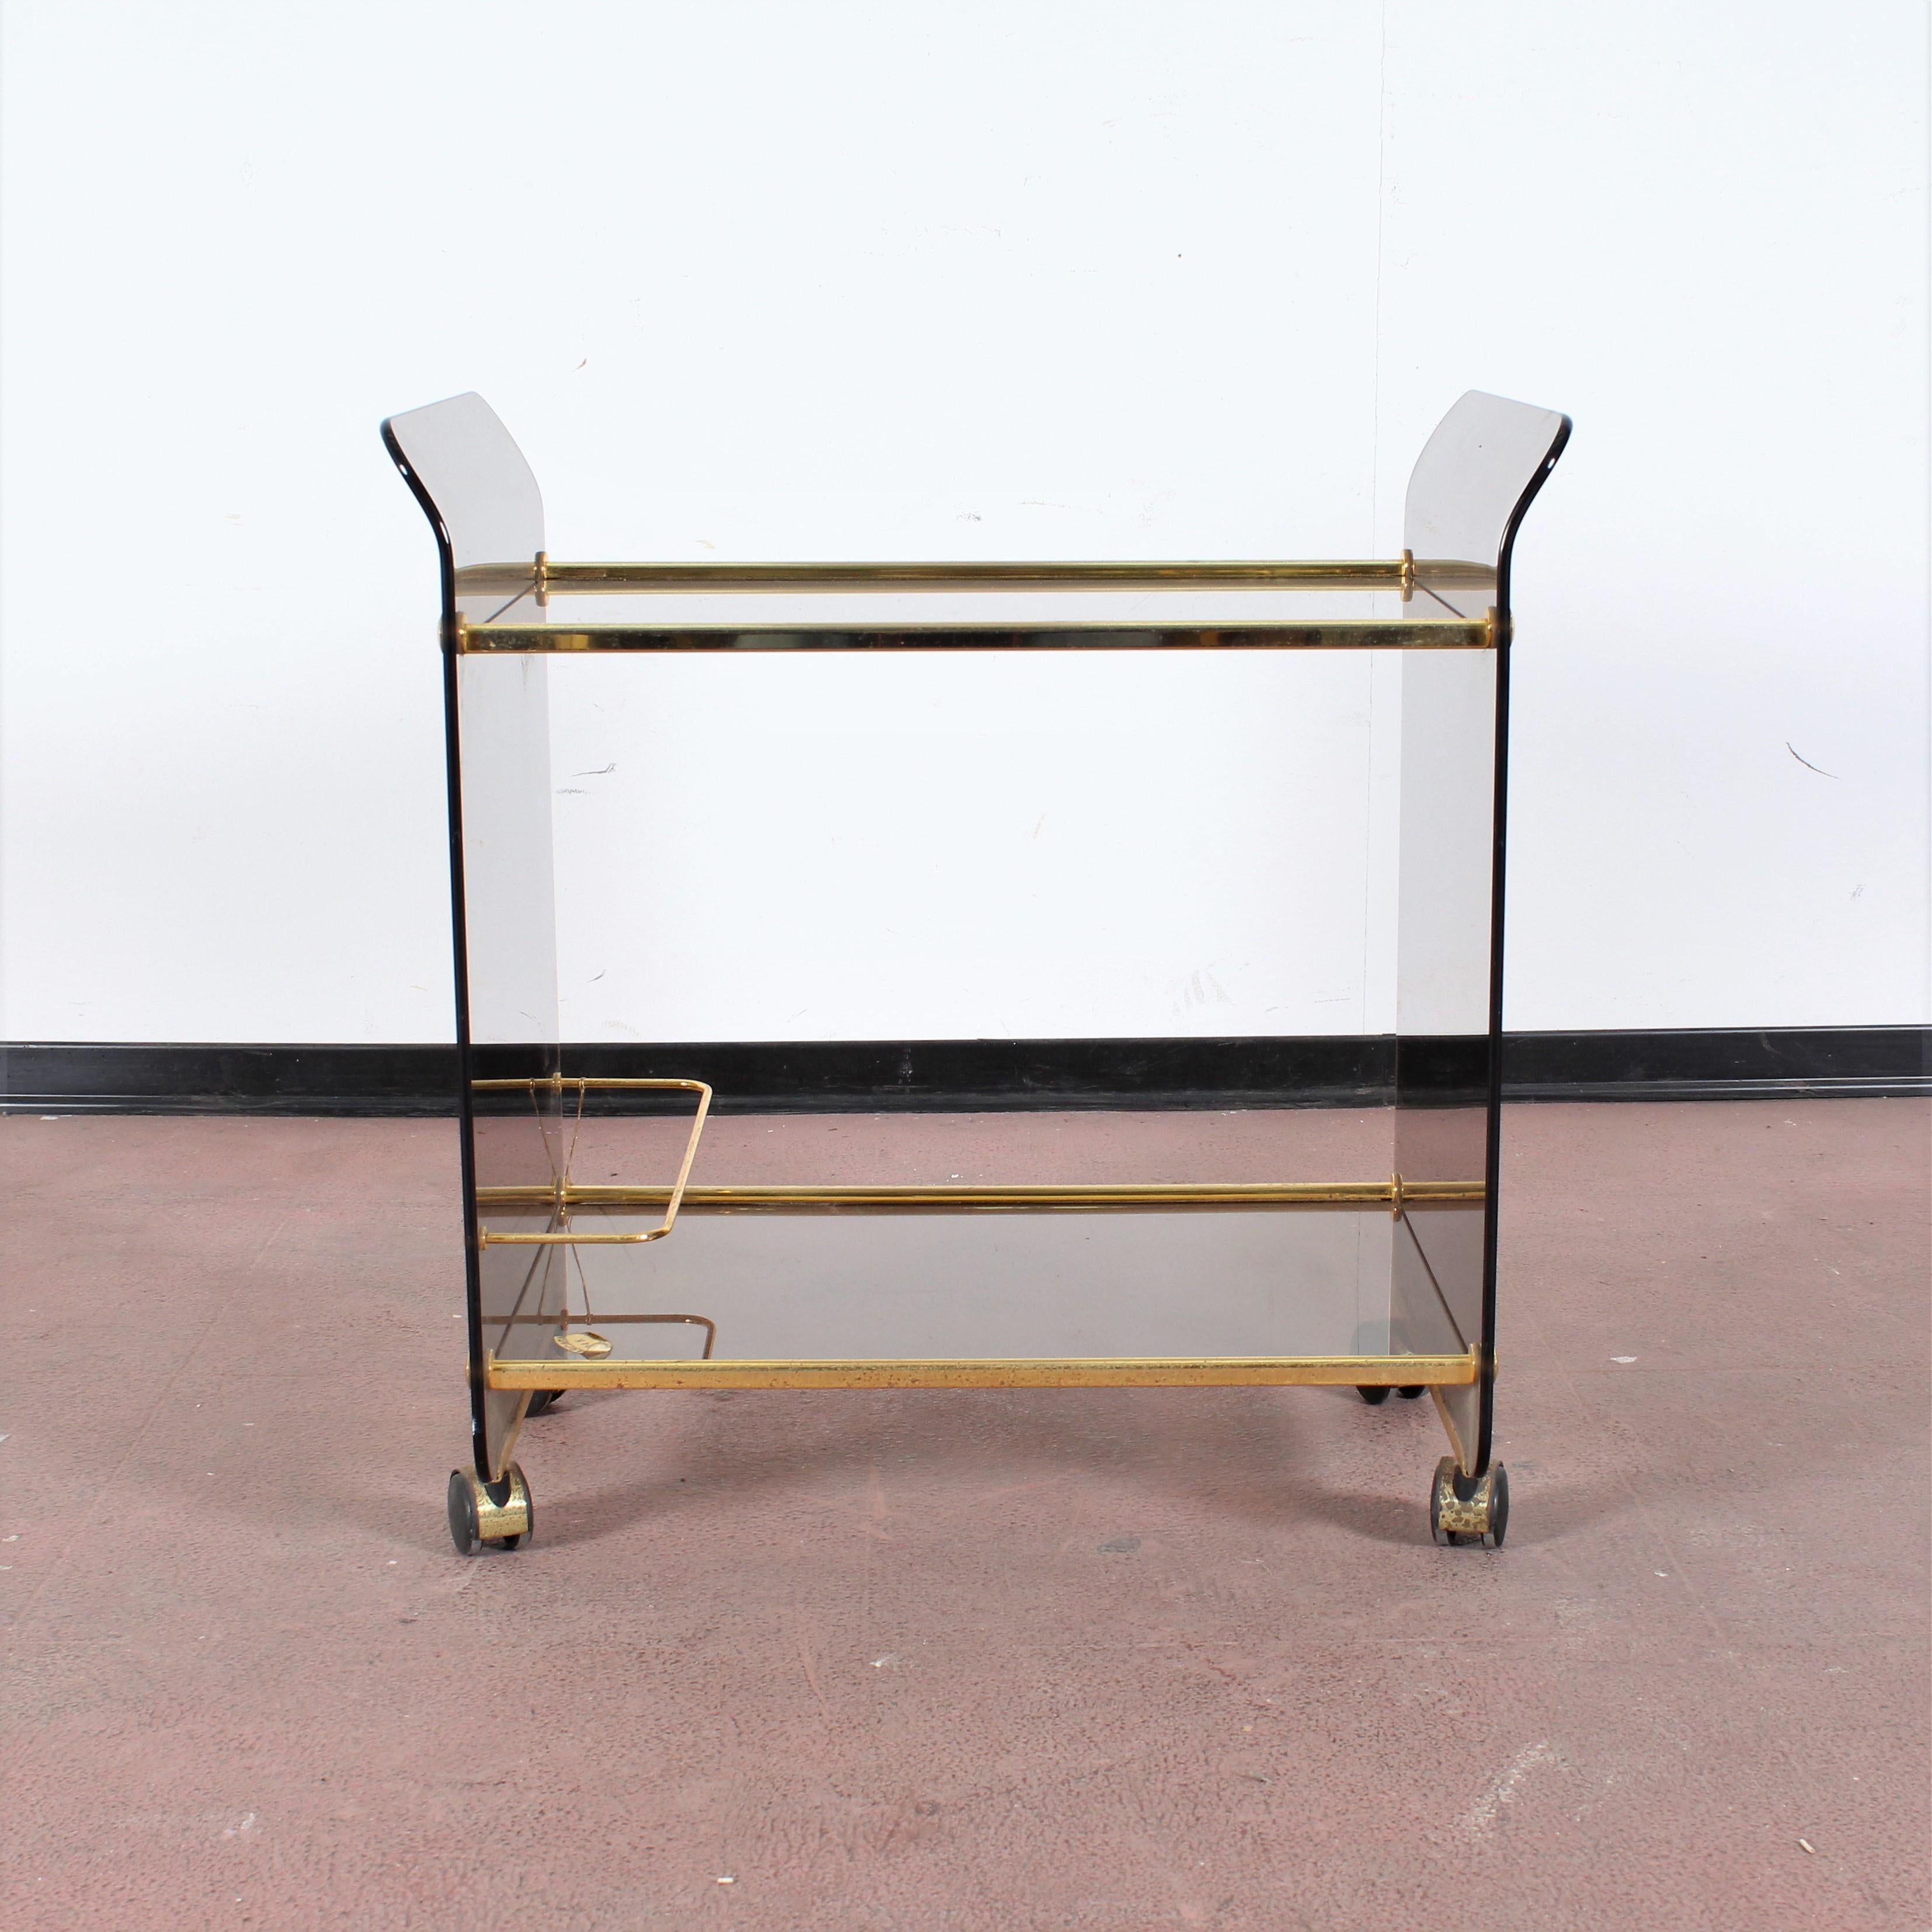 Beautiful two-tier bar cart on wheels, in curved smoked glass, with elements in 24-carat gold-plated brass. Design by Umberto Mascagni, 1960s, Italy.
The original brand on the glued label can be read on the underlying surface, slightly worn on the